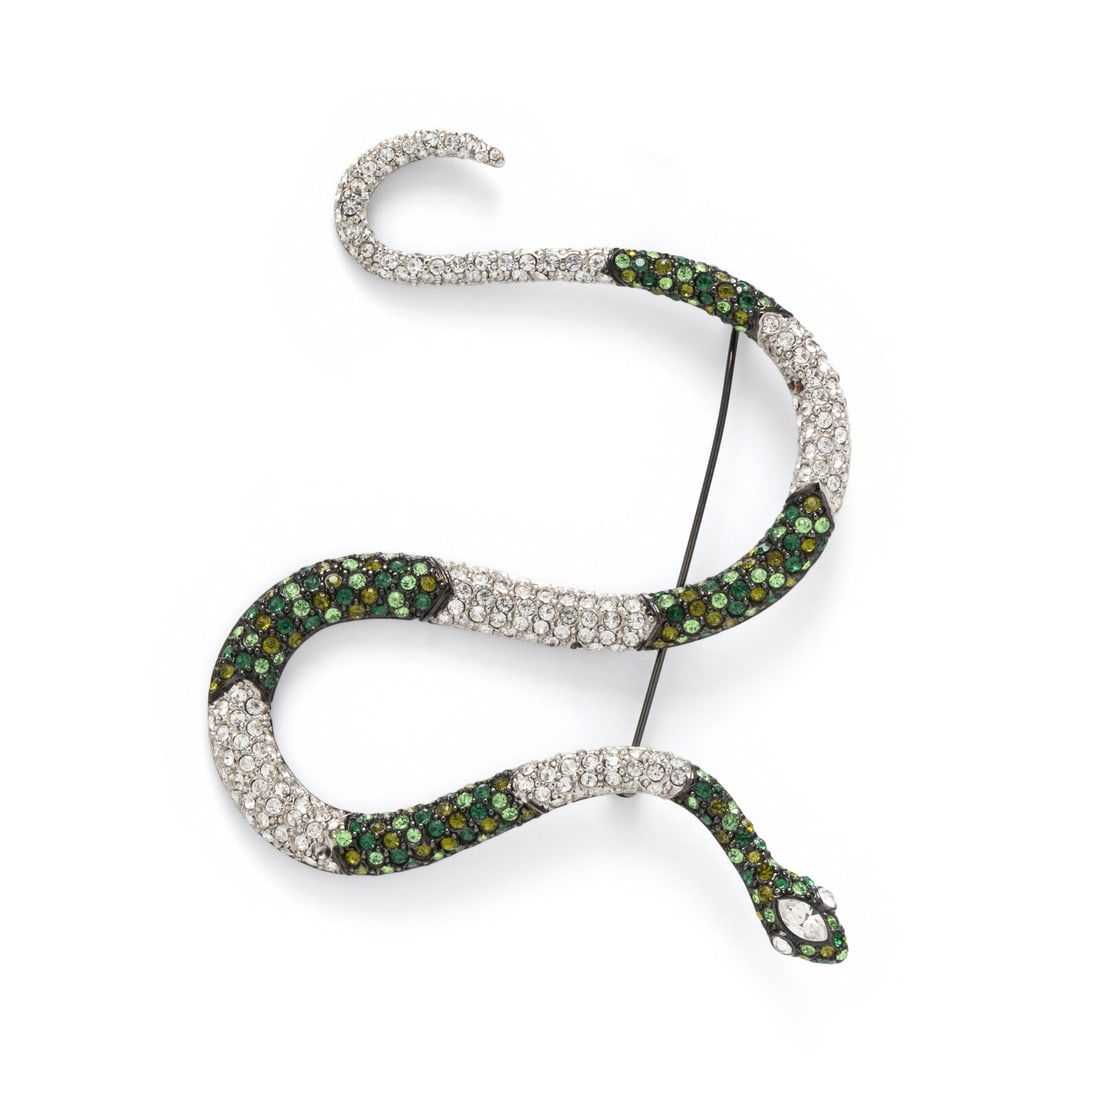 Green and white rhinestone and metal snake pin by Kenneth Jay Lane, estimated at $200-$300 at Freeman’s Hindman.